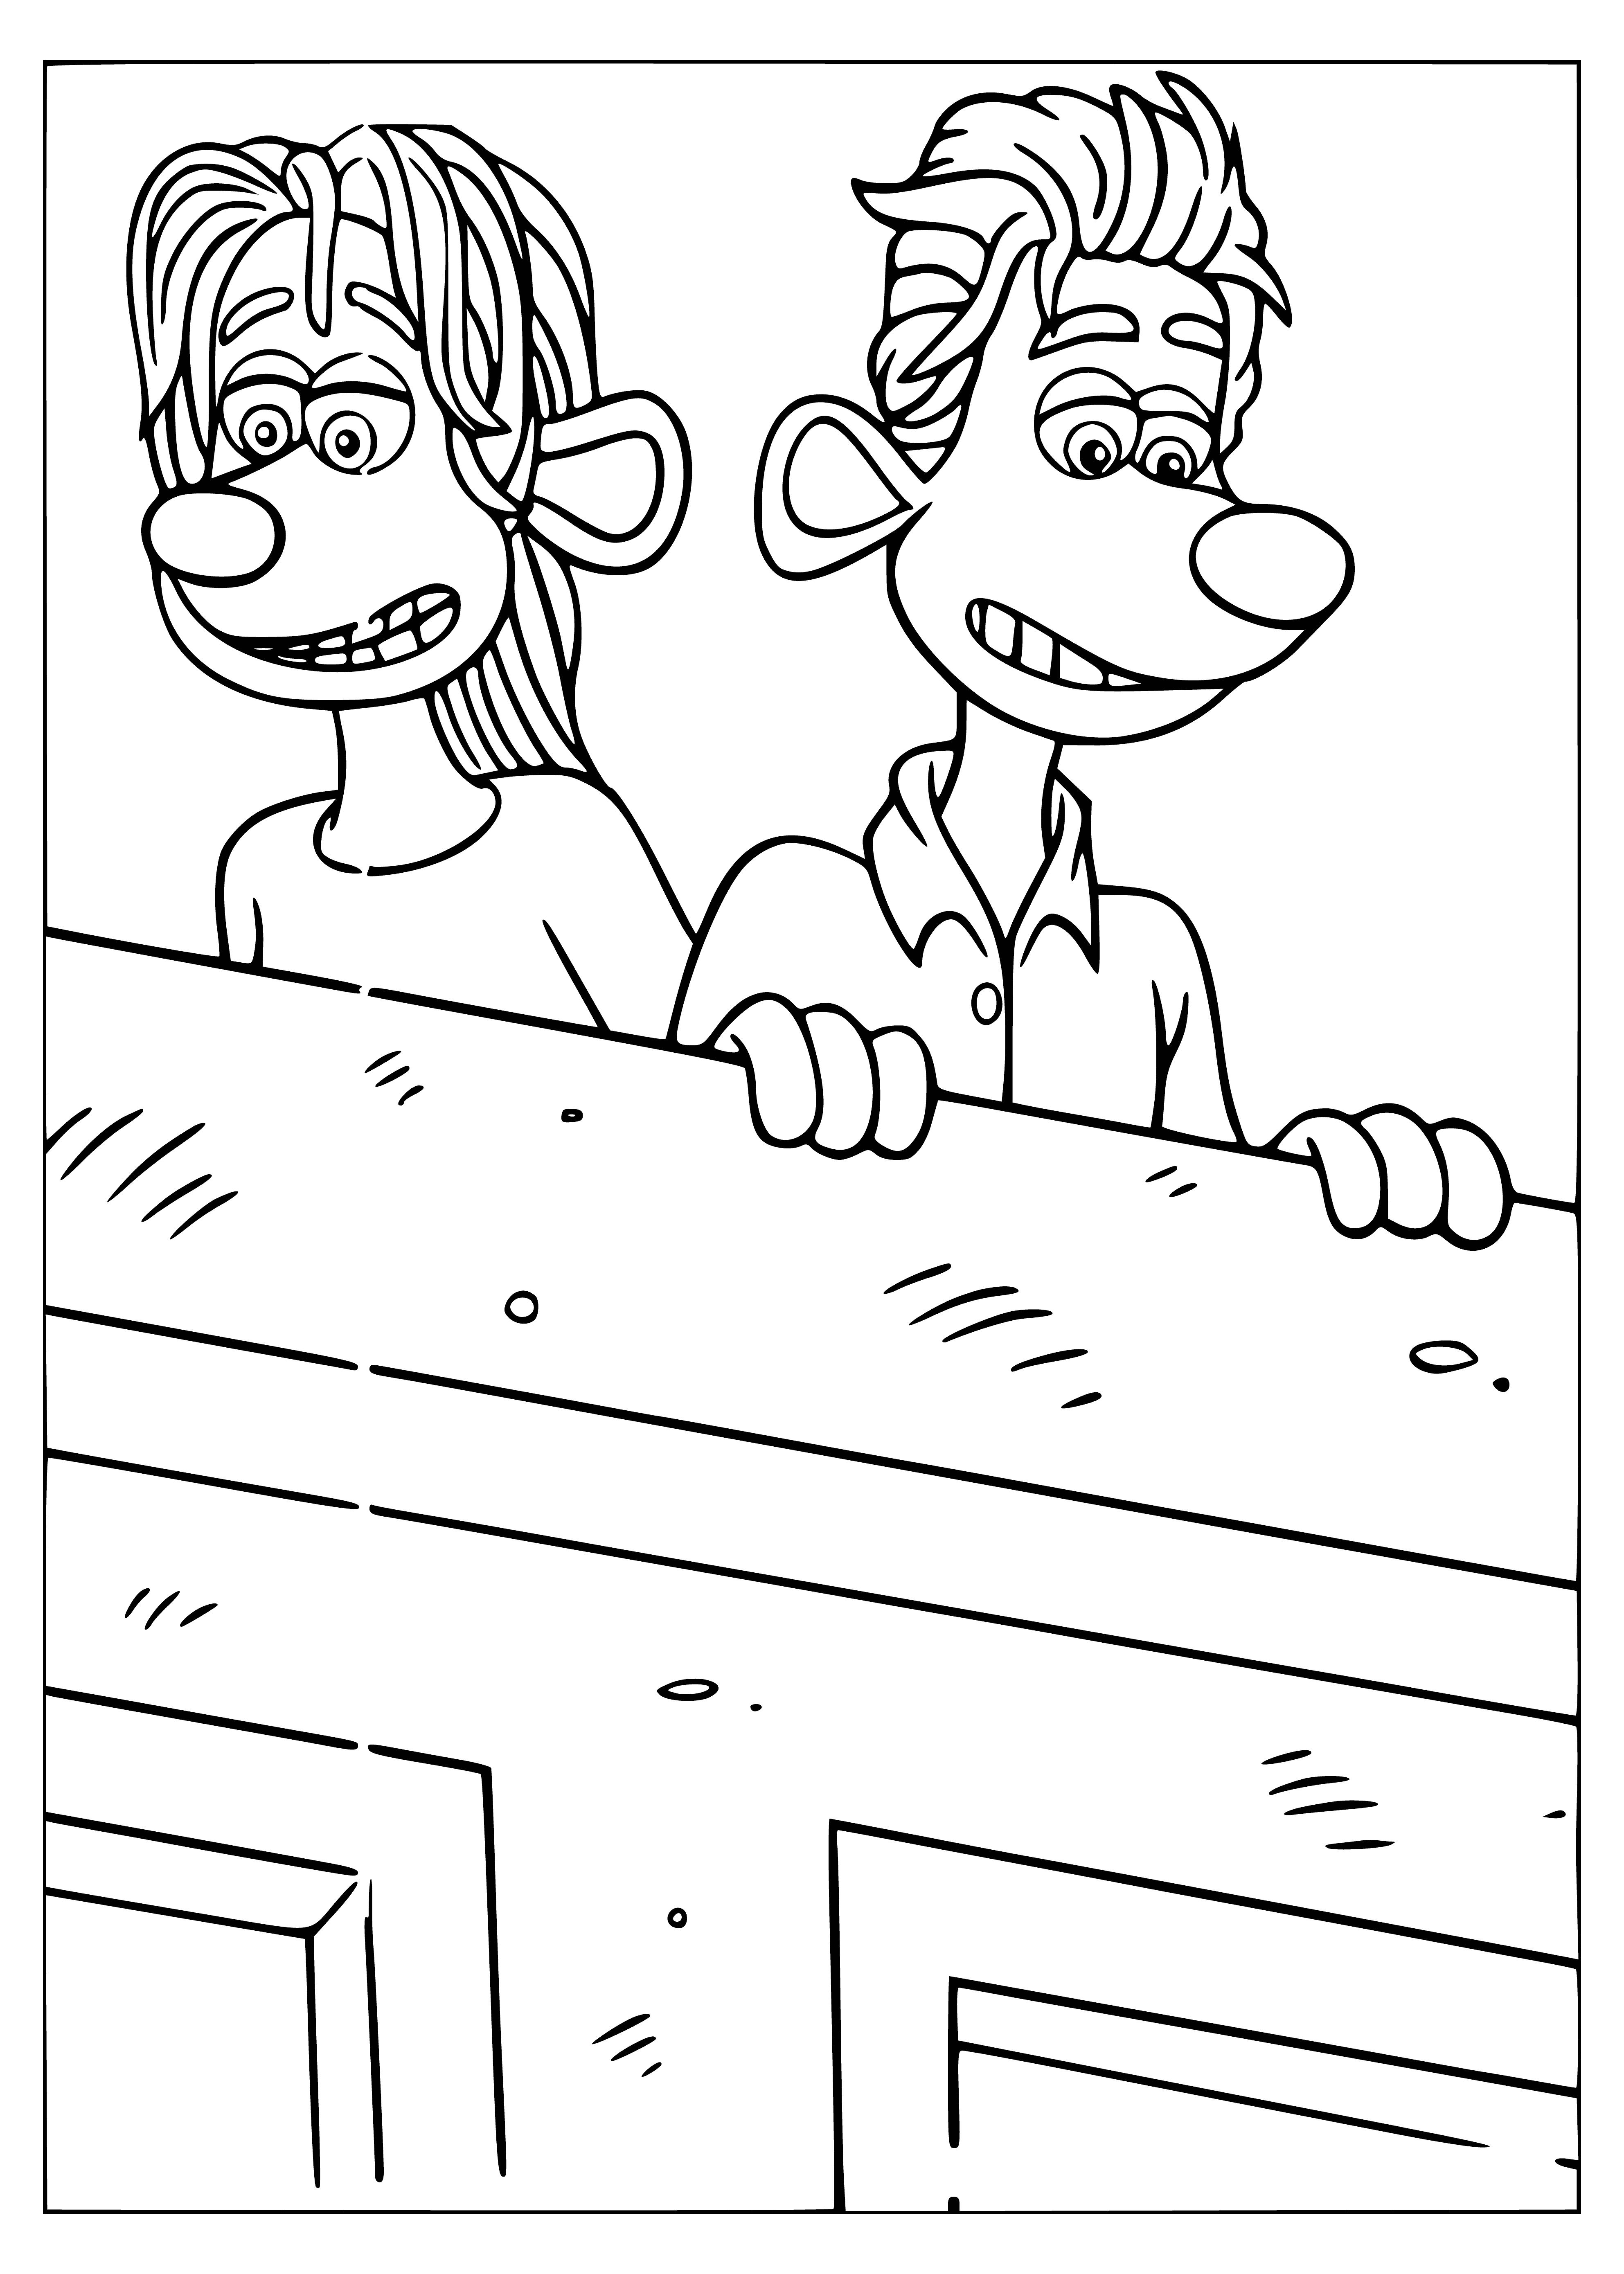 coloring page: Two rats: one standing on a log, holding a rope attached to a basket w/other rat inside.